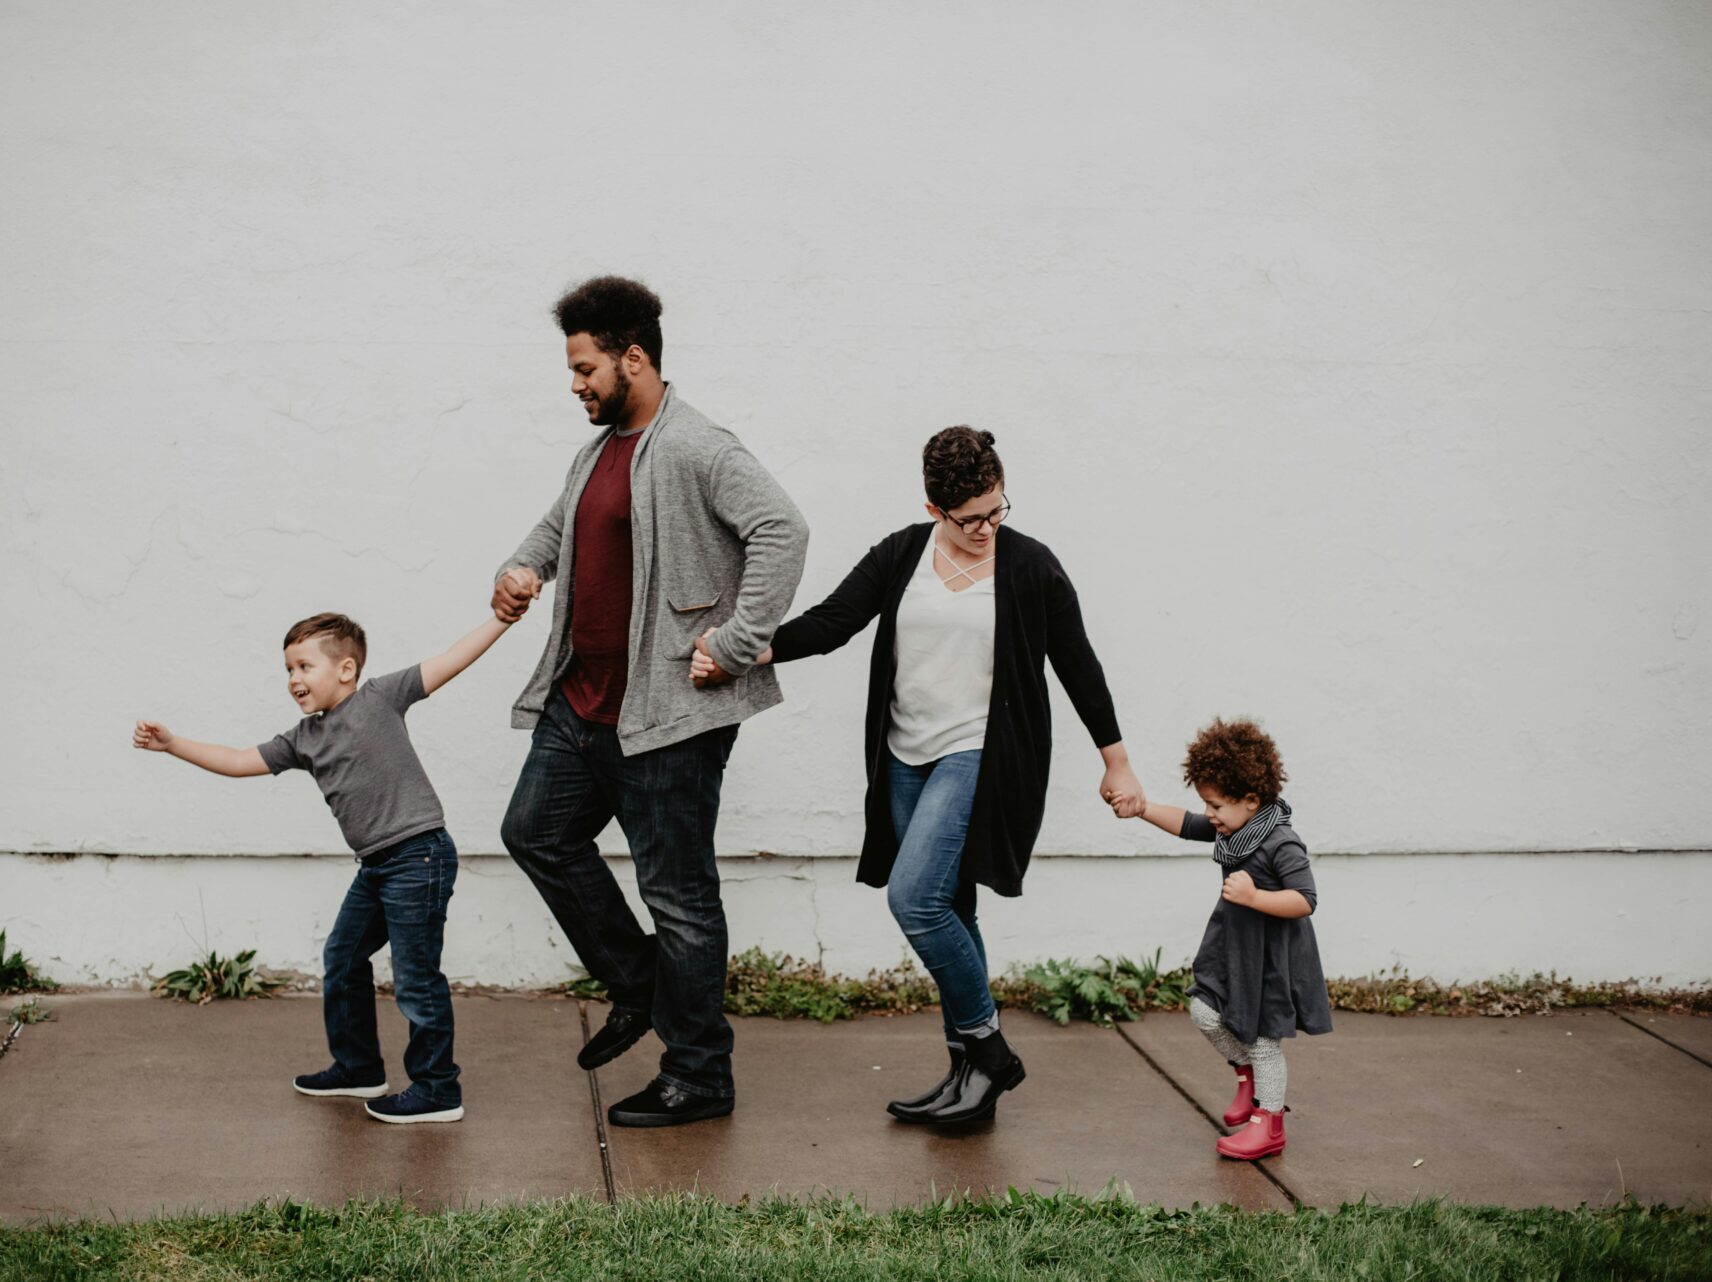 family with 2 kids walking on sidewalk in front of white wall, holding hands